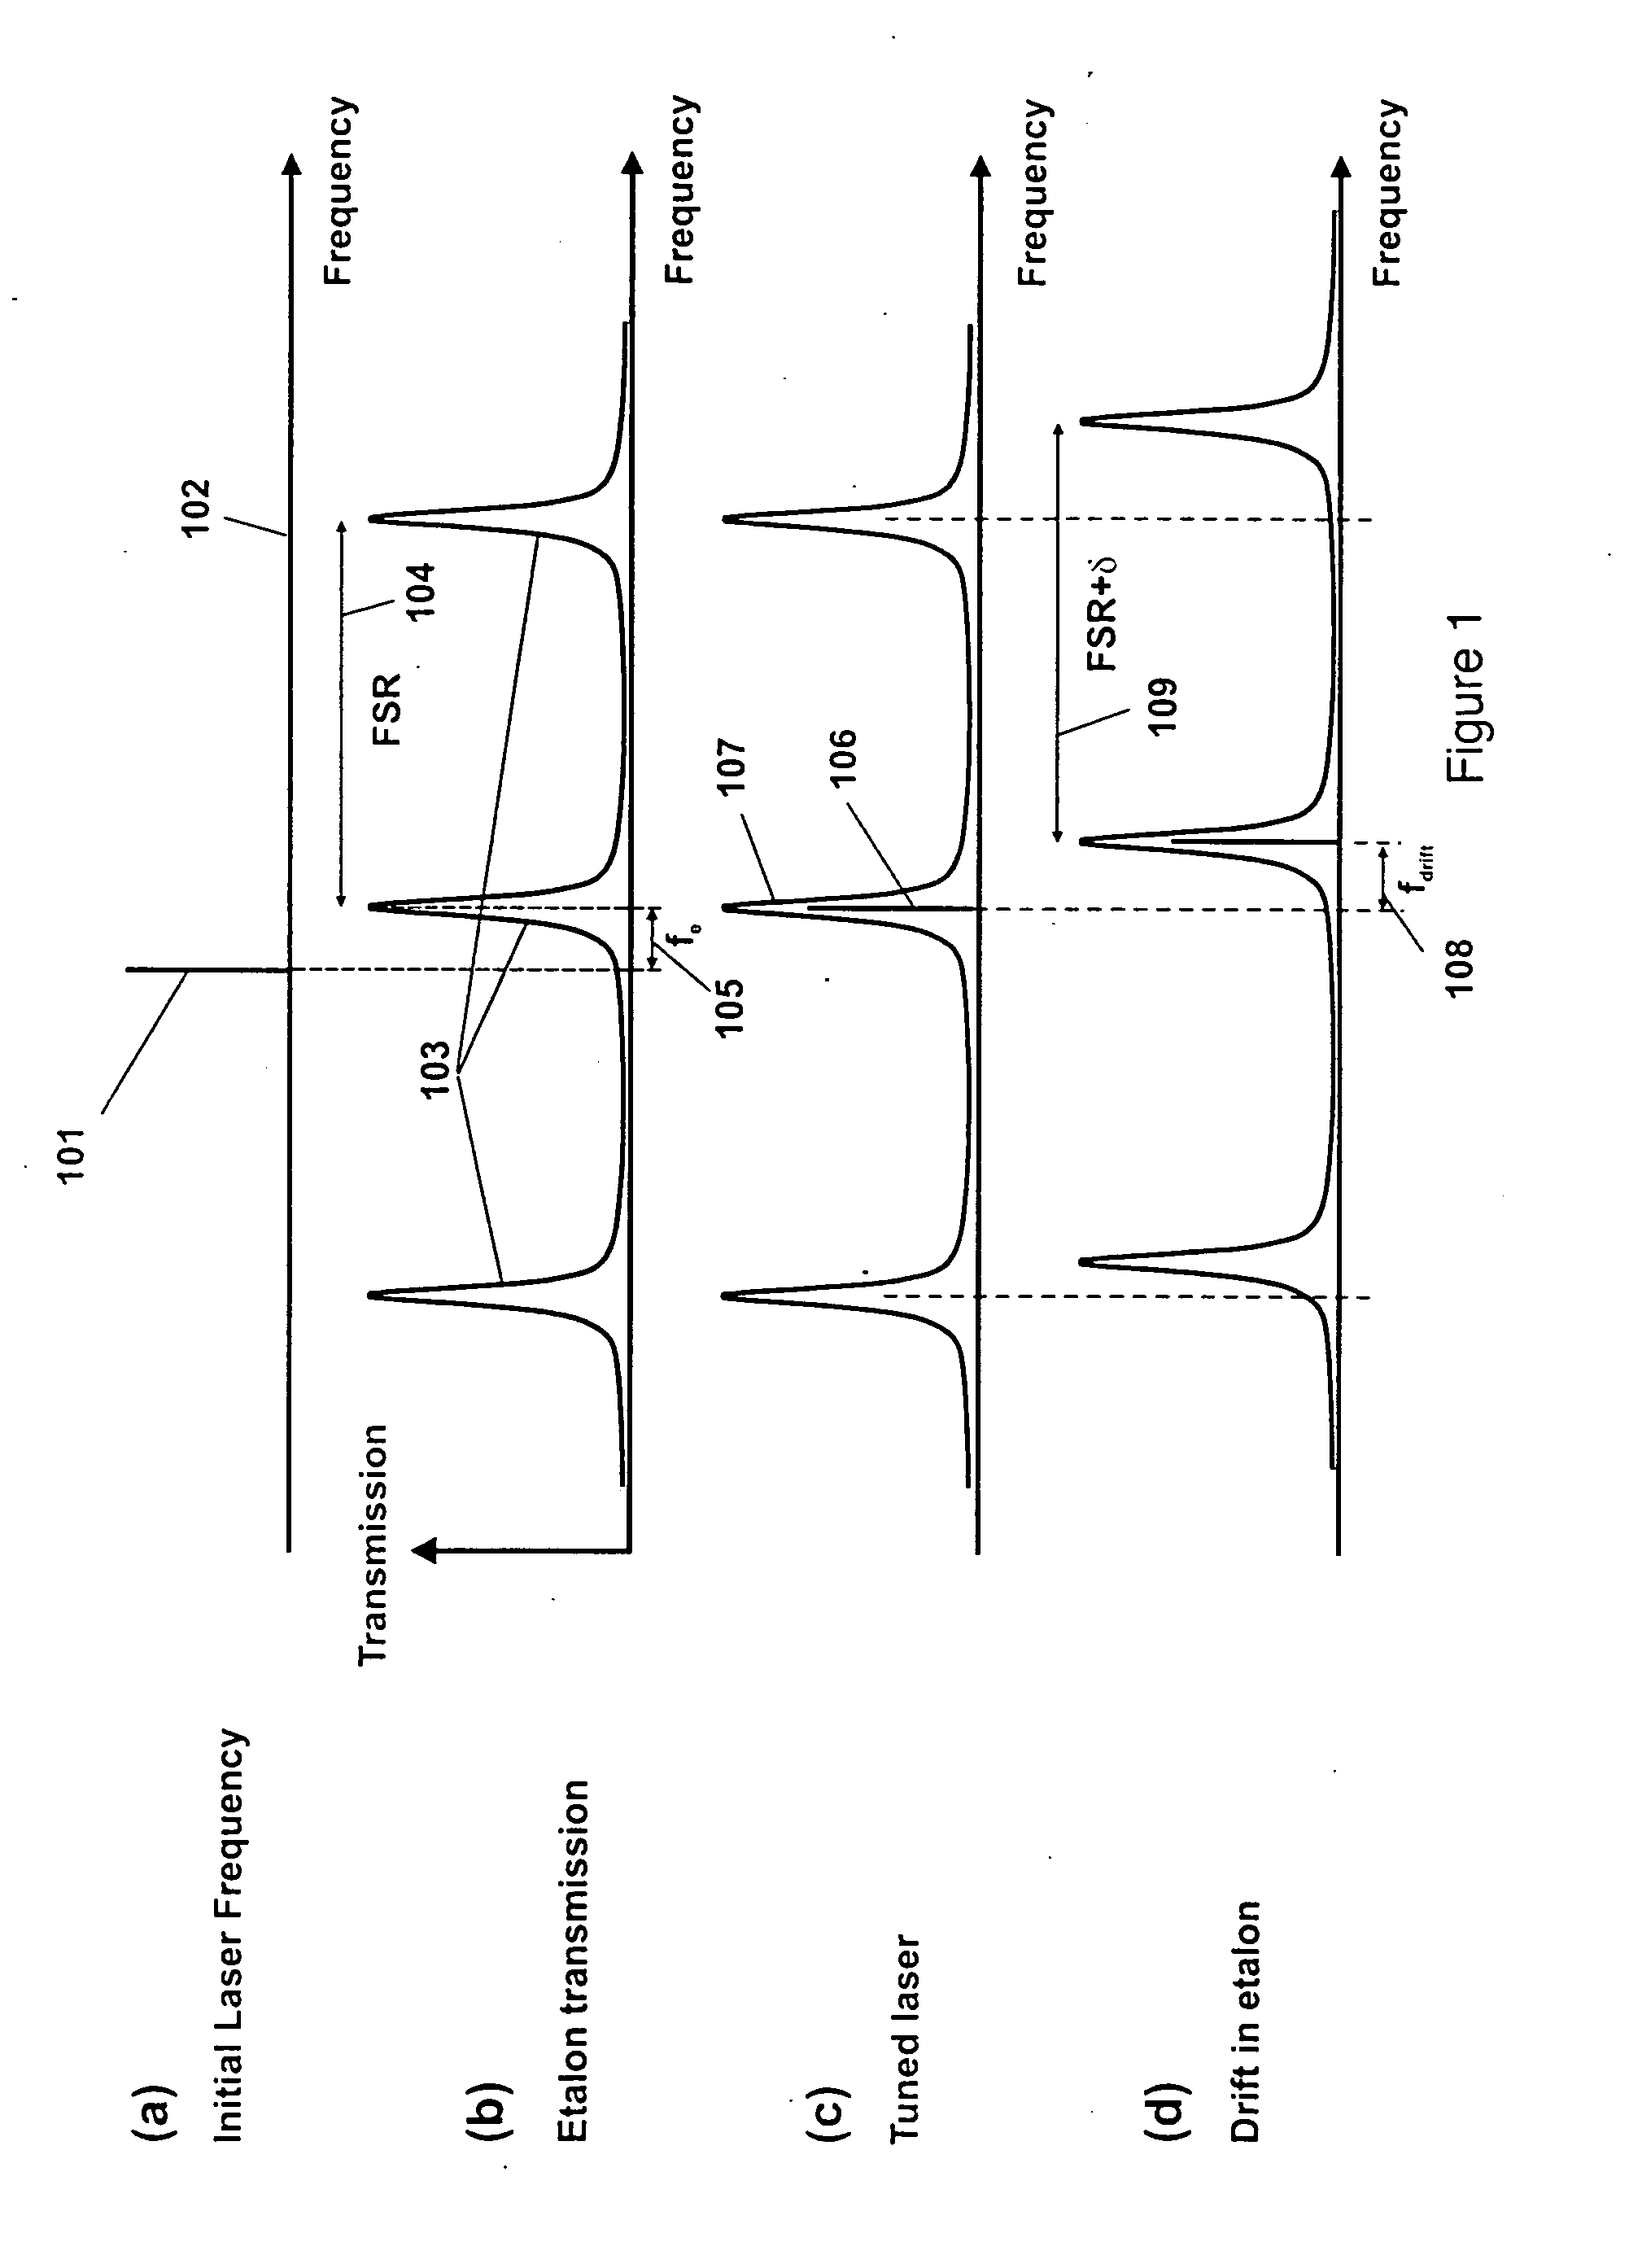 Apparatus and method for stabilizing the frequency of lasers